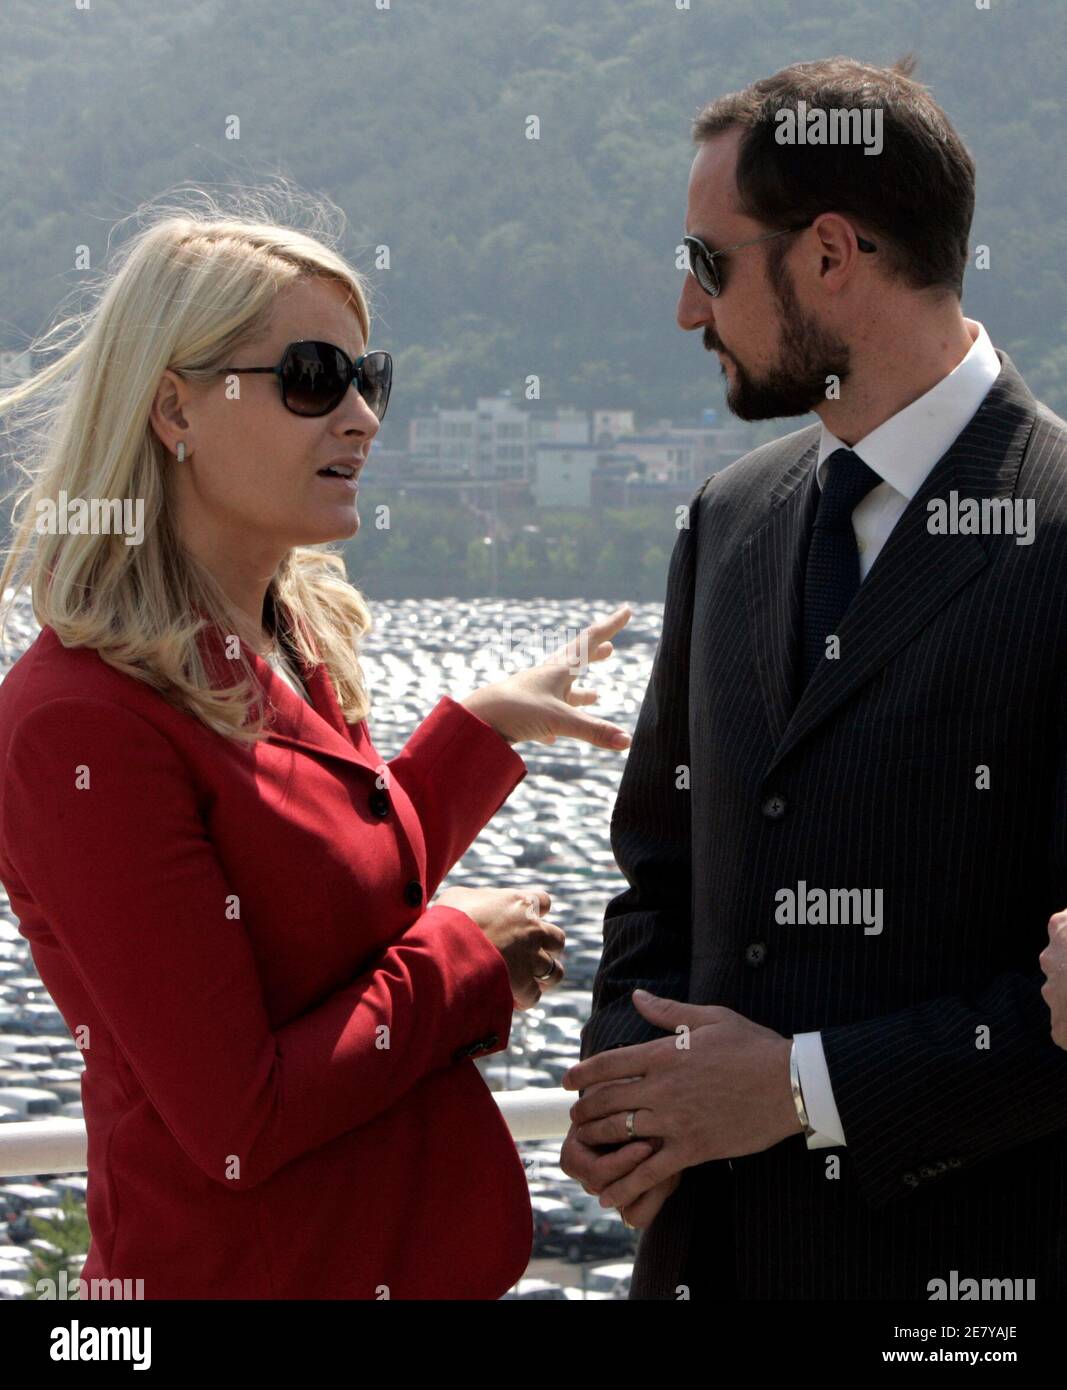 Norwegian Crown Prince Haakon (R) and Crown Princess Mette-Marit talk during their visit for one of the ships owned by Wilh. Wilhelmsen's Korean joint venture EUKOR, which handles all car exports from South Korea for Hyundai Motor Company and Kia Motors corporation, at Hyundai Motor's export port in Ulsan, about 410 km (256 miles) southeast of Seoul, May 11, 2007.  REUTERS/Jo Yong-Hak (SOUTH KOREA) Stock Photo